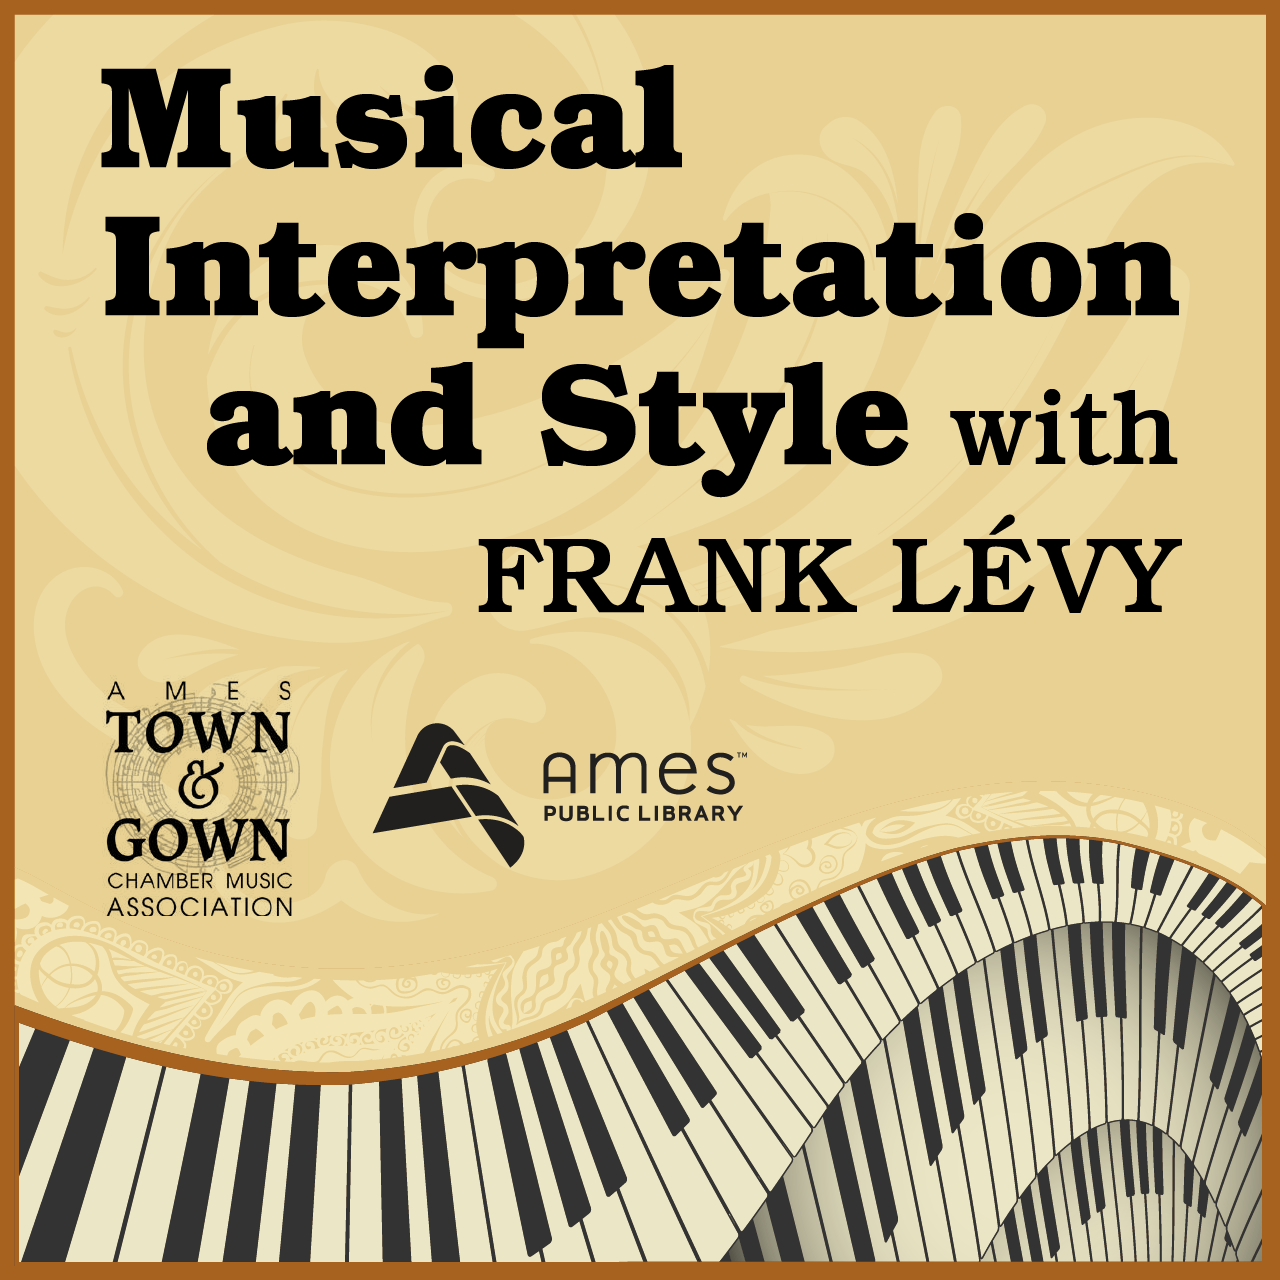 Musical Interpretation and Style with Frank Levy